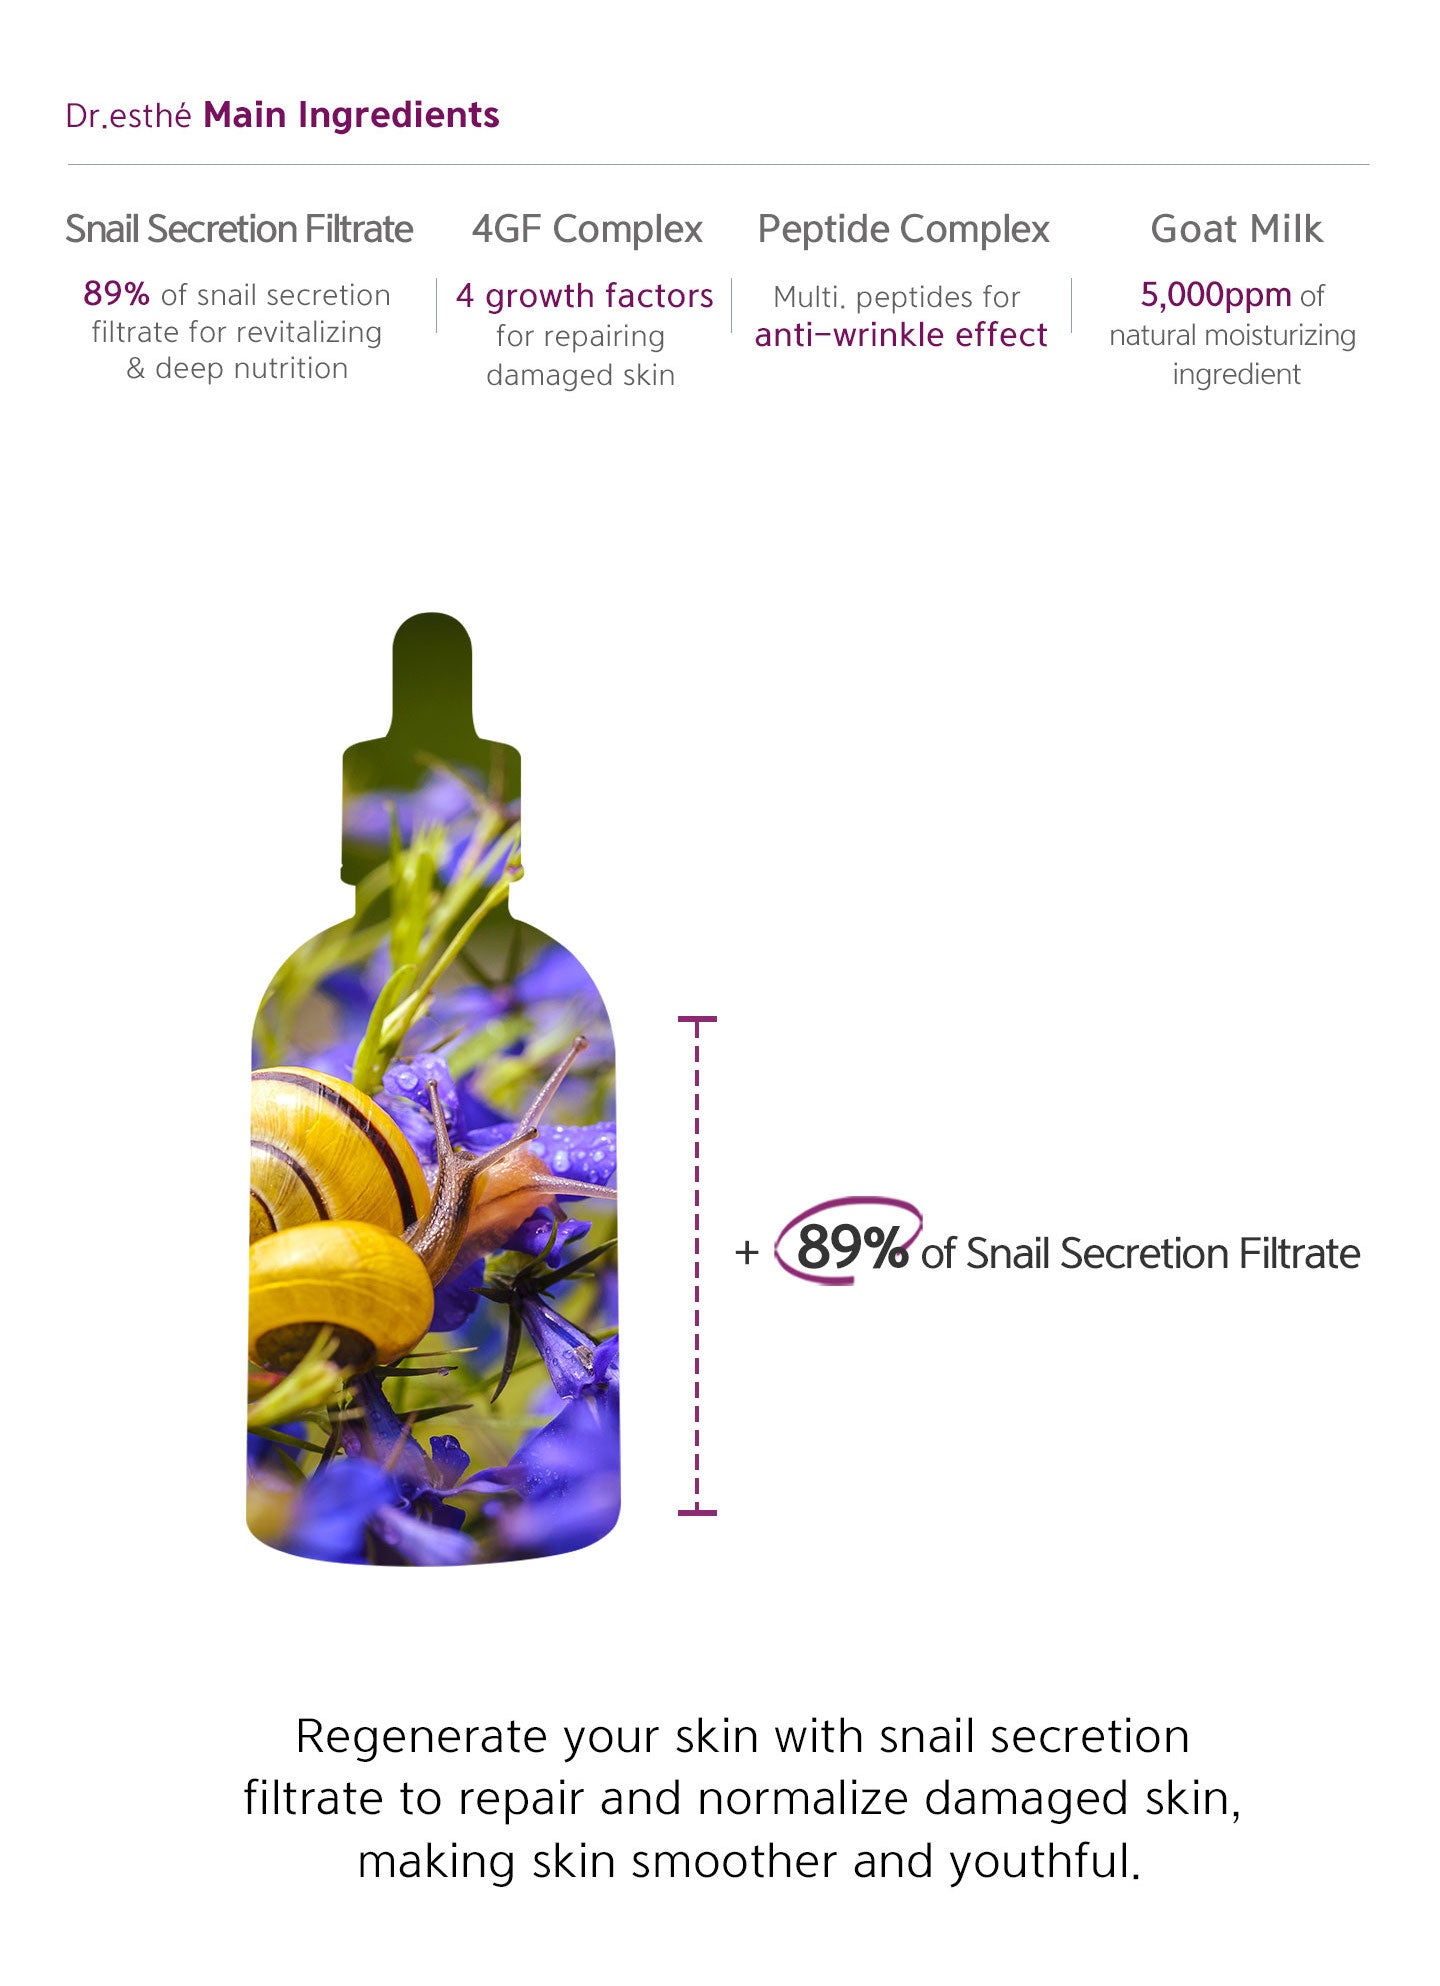 89% of nail secretion filtrate, 4 growth factors, multi-peptides for anti-wrinkle effect, and 5000 ppm of natural moisturizing ingredient. Regenerate your skin with snail secretion filtrate to repair and normalize damaged skin, making skin smoother.